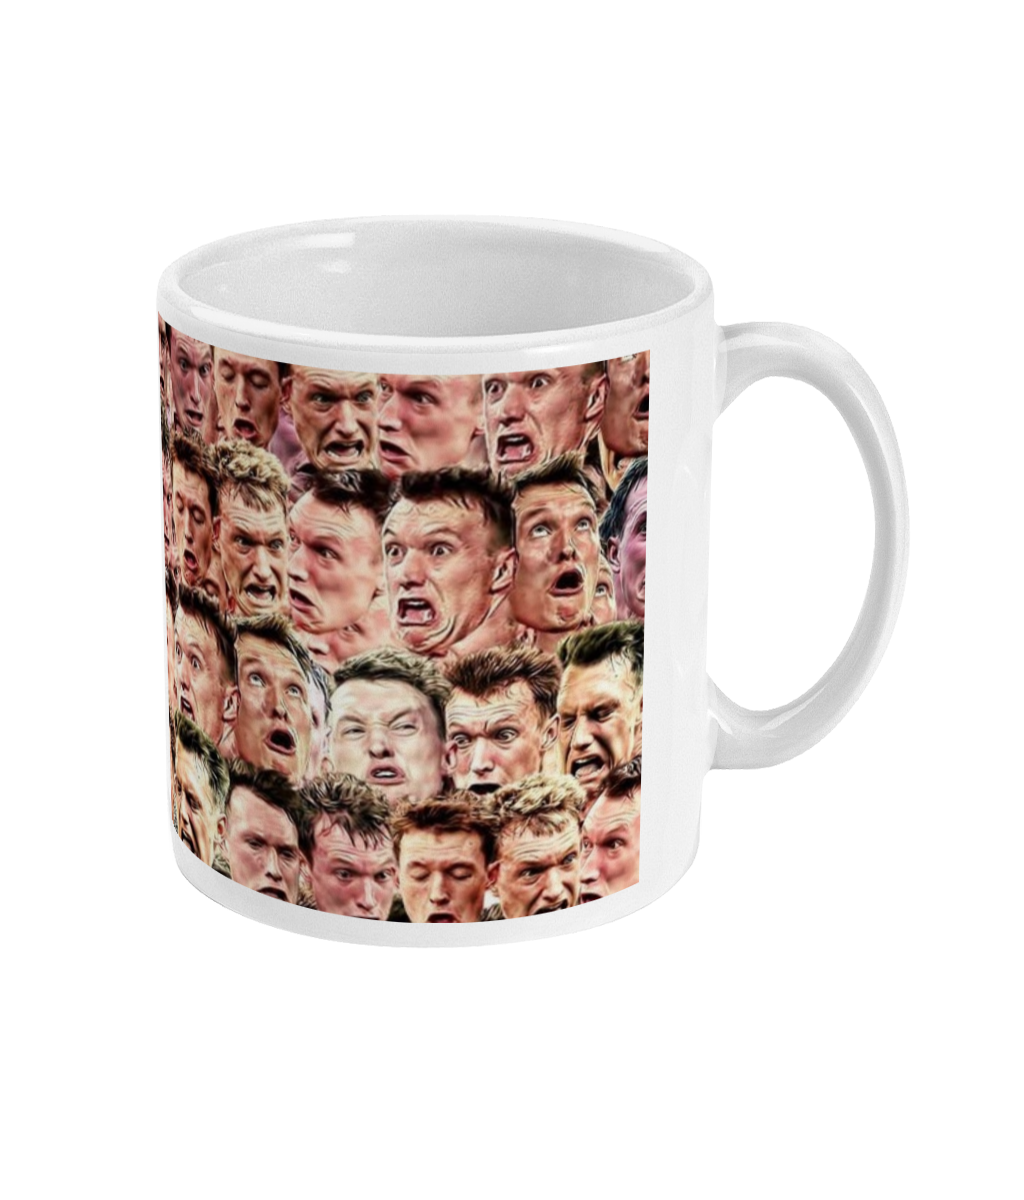 The many faces of Phil Jones - The mug